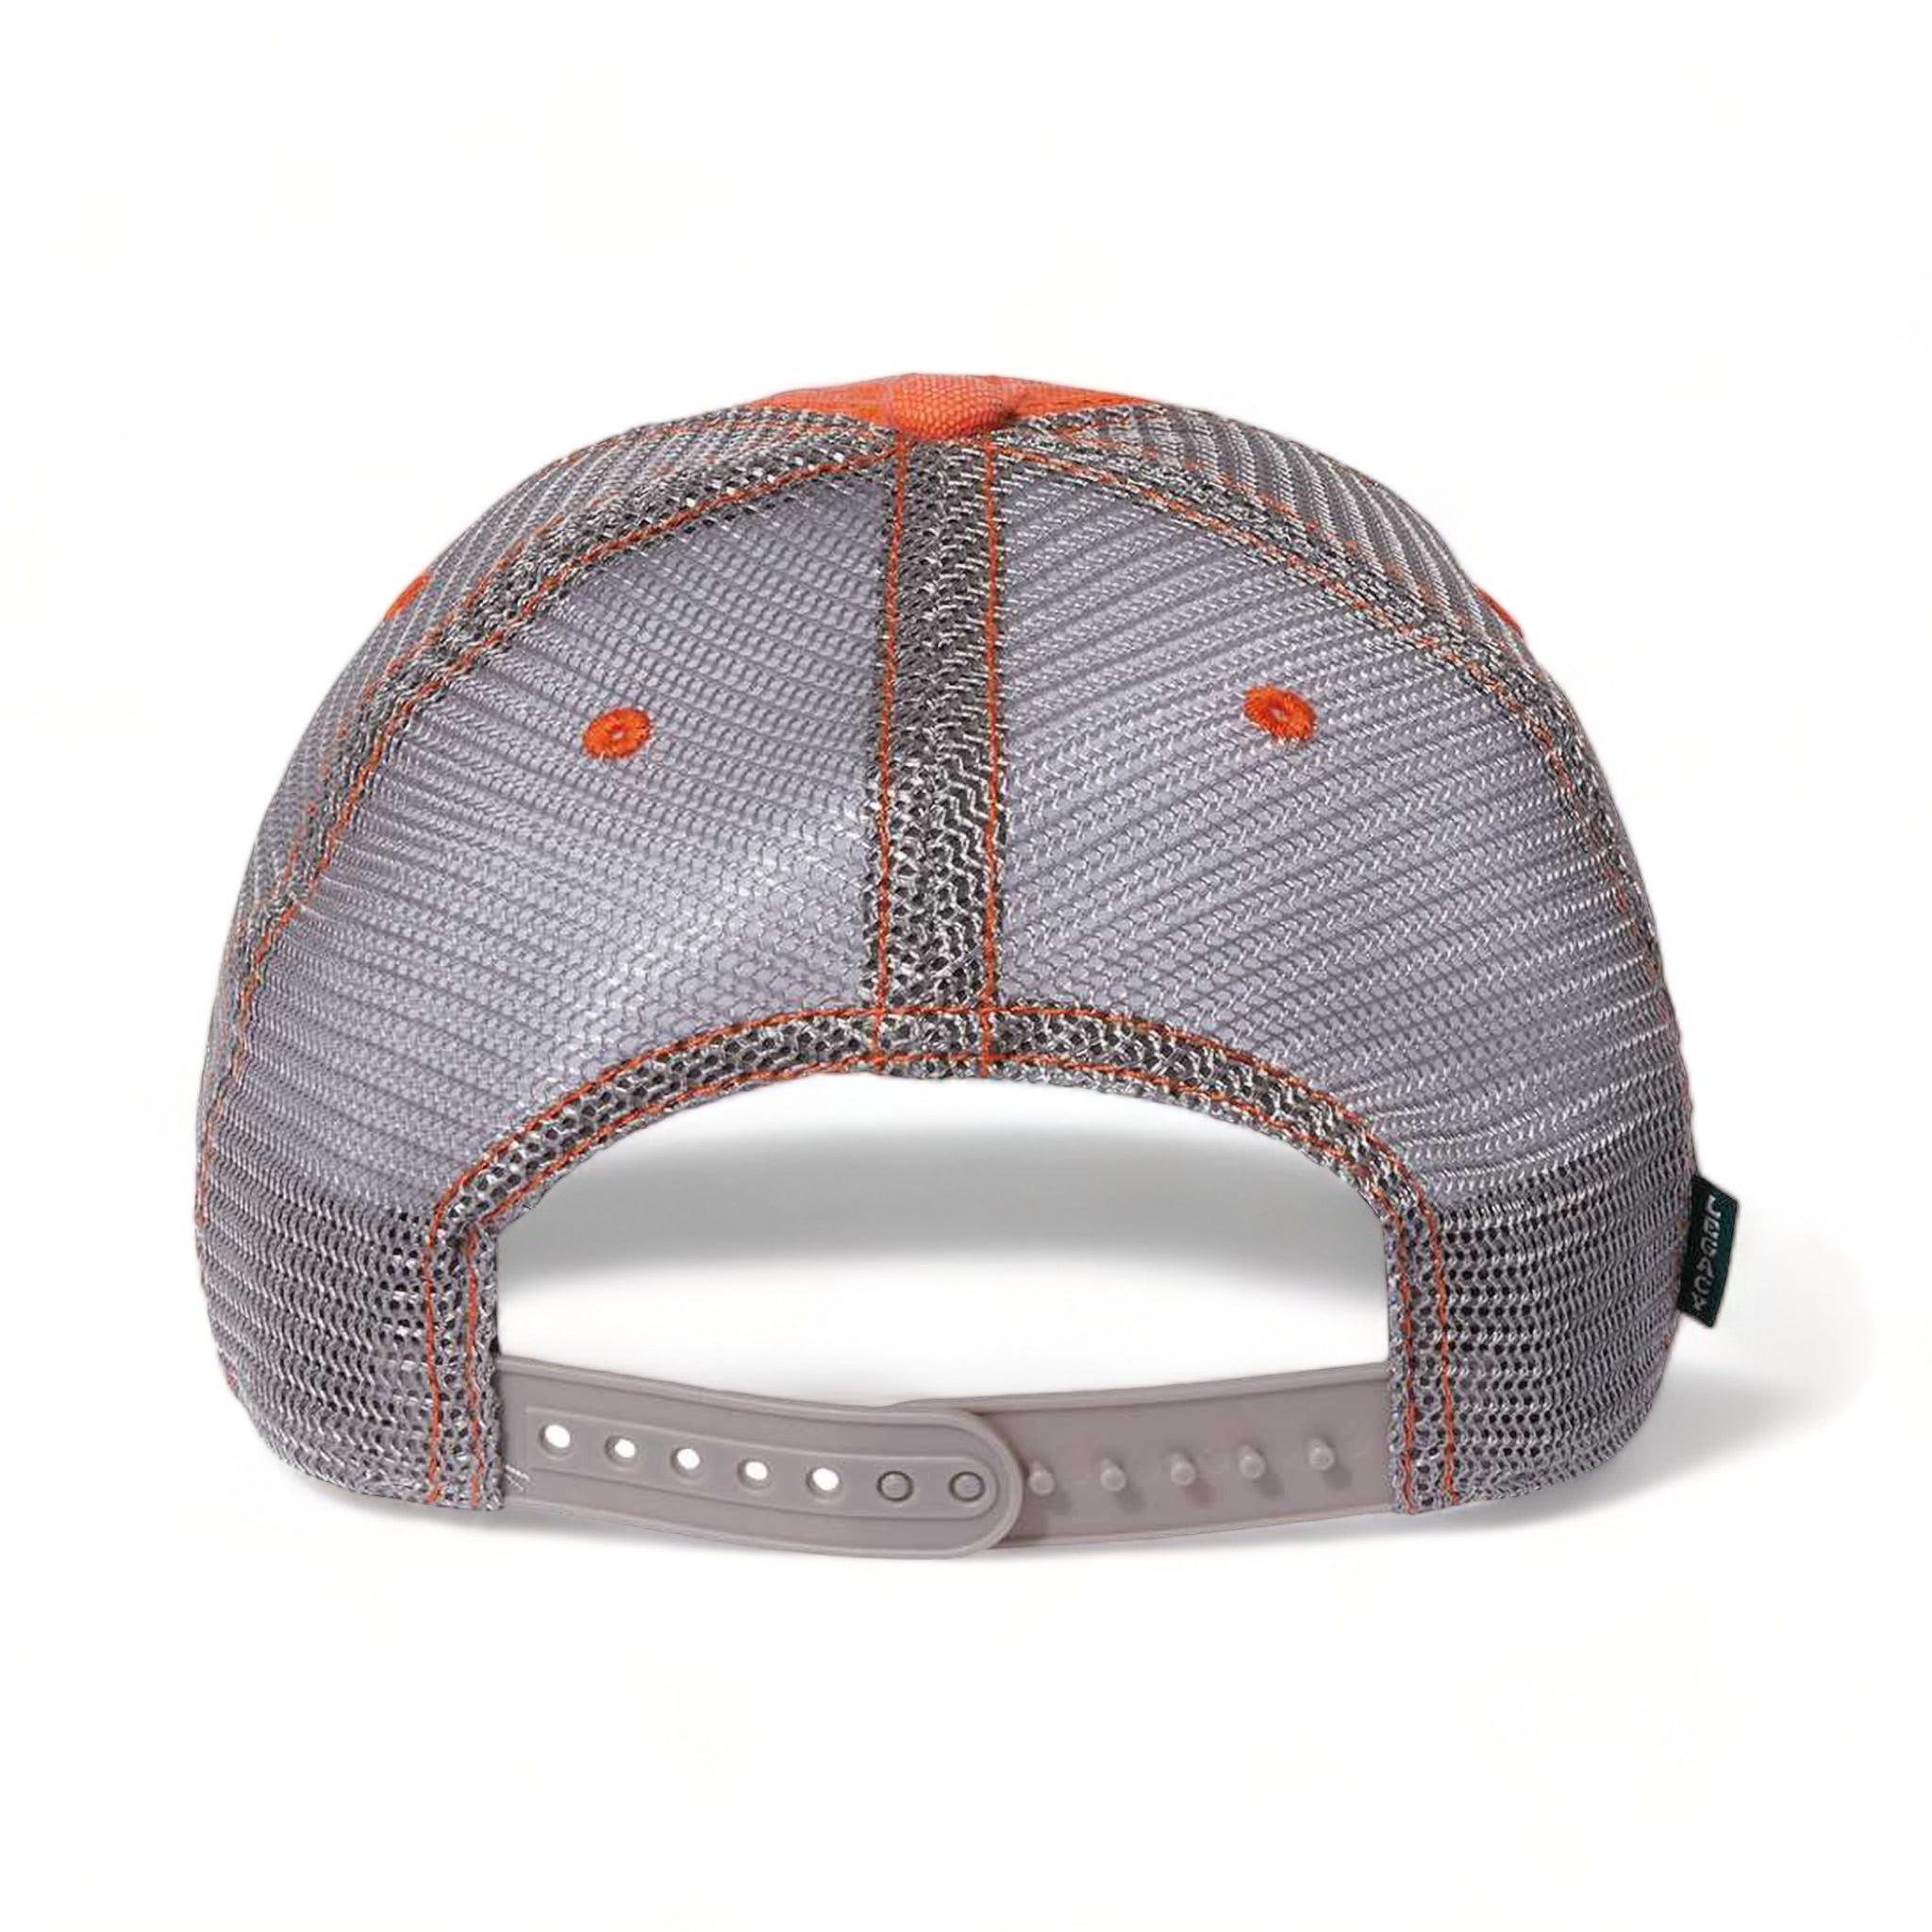 Back view of LEGACY DTA custom hat in orange and grey